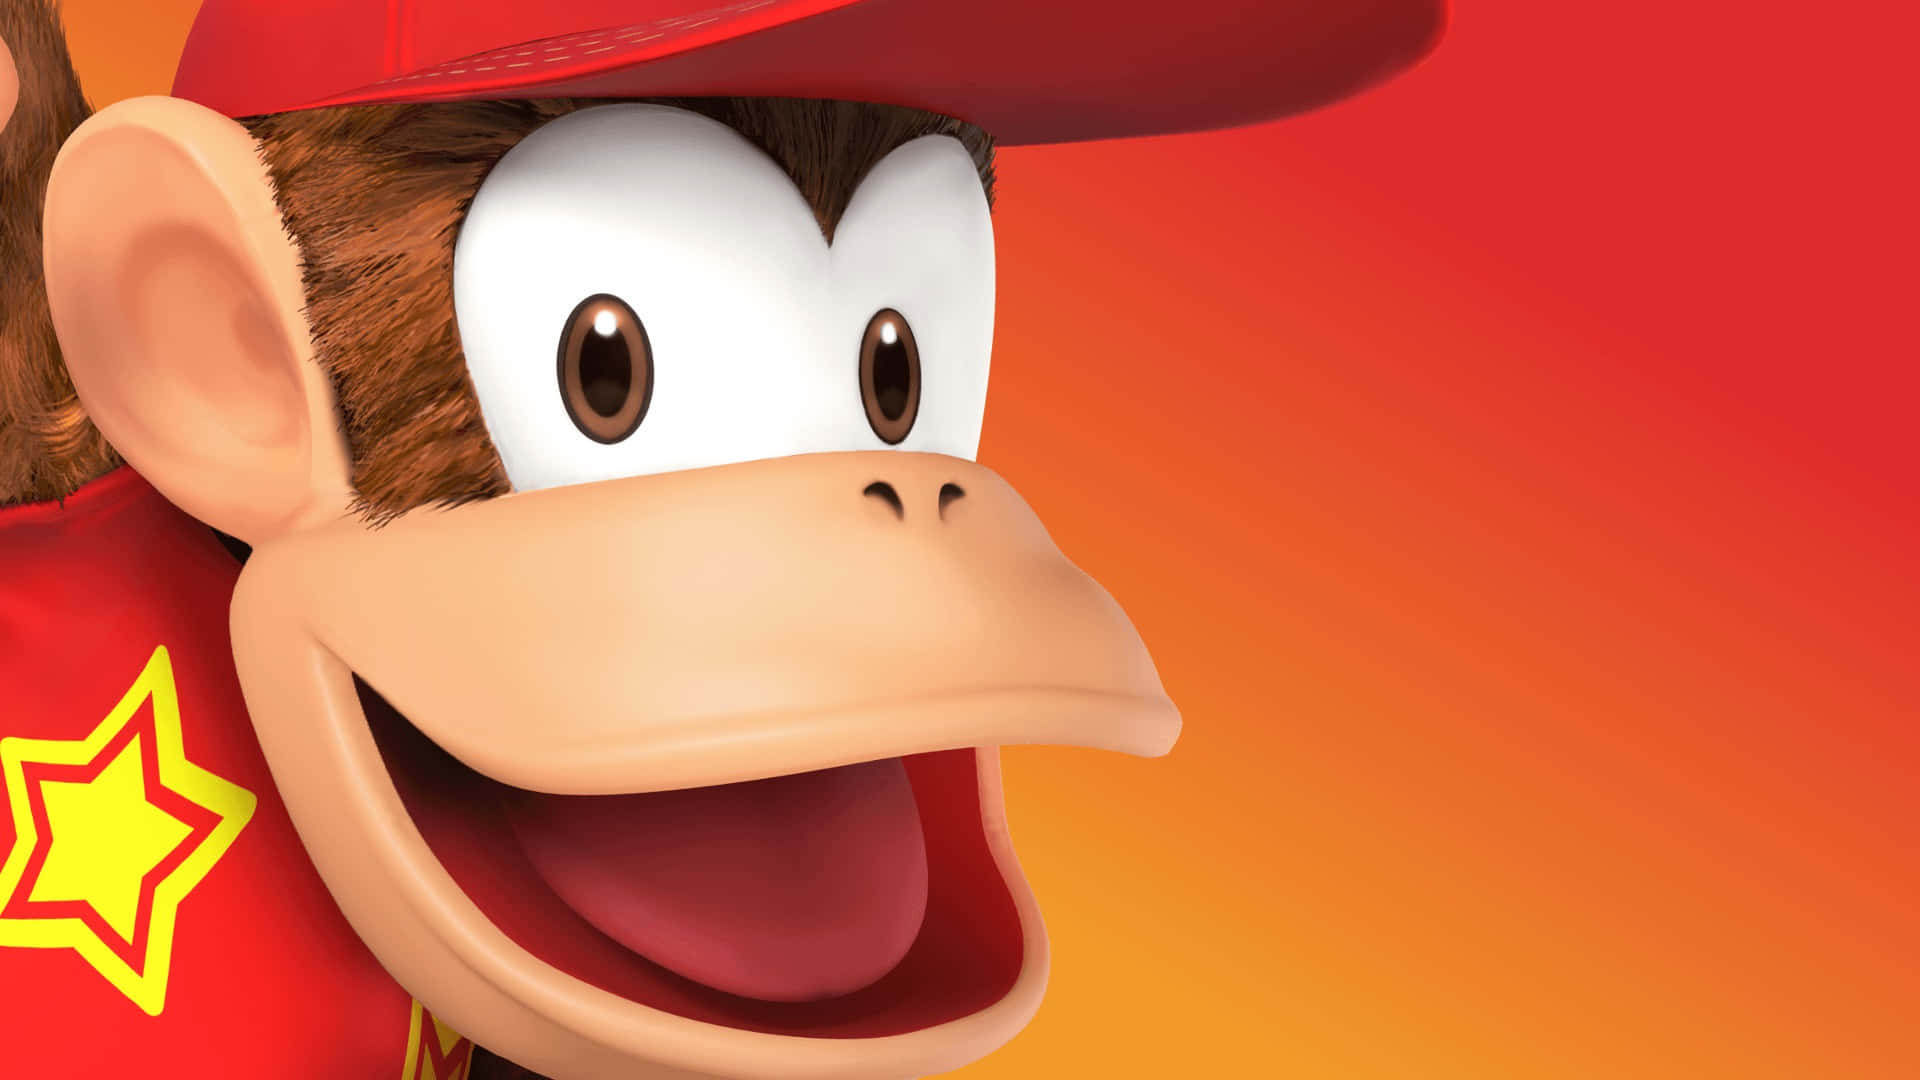 Diddy Kong Swinging into Action Wallpaper